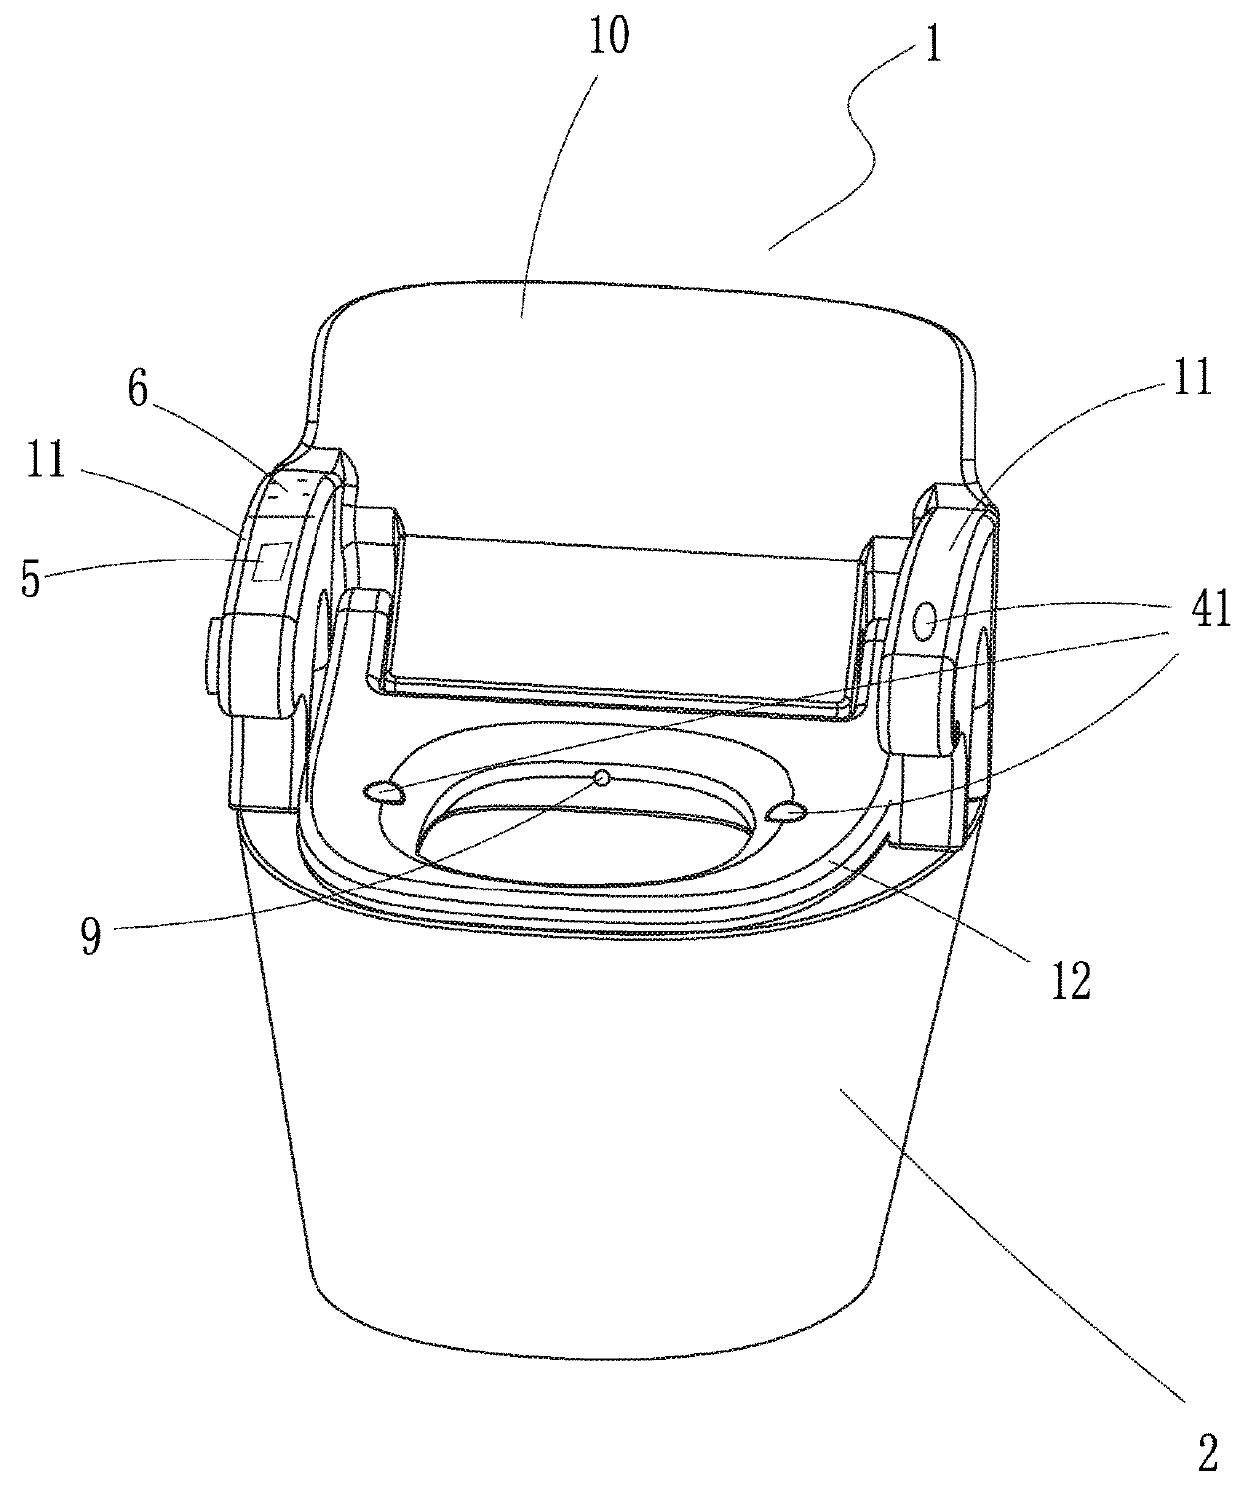 Smart toilet with function of electrocardiographic lead monitoring